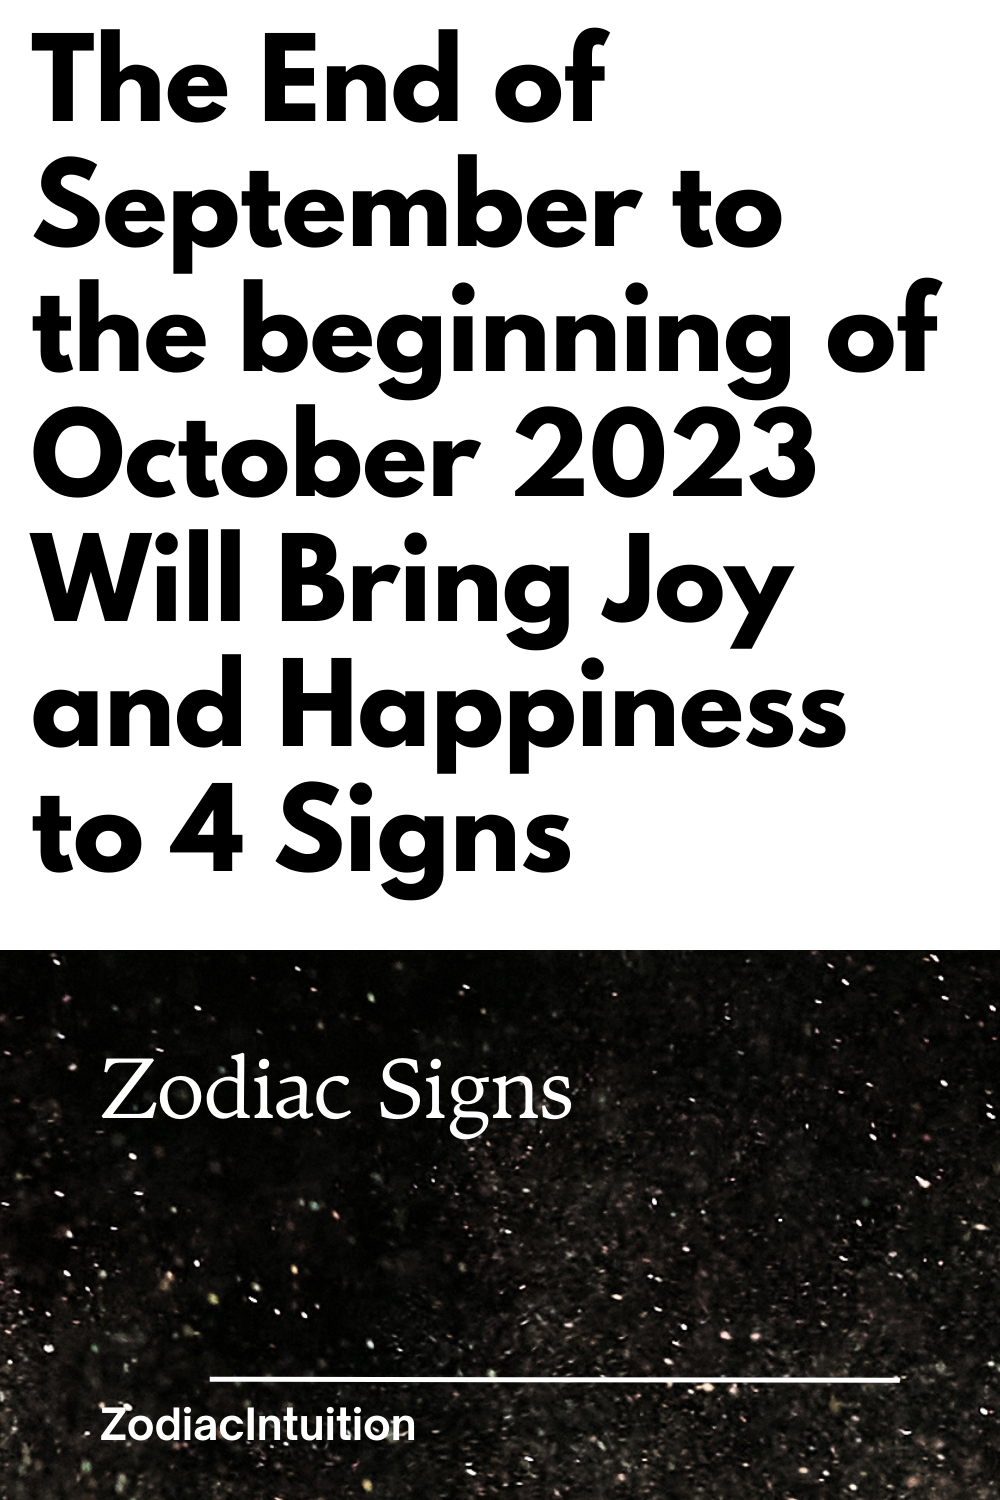 The End of September to the Beginning of October 2023 Will Bring Joy and Happiness to 4 Signs